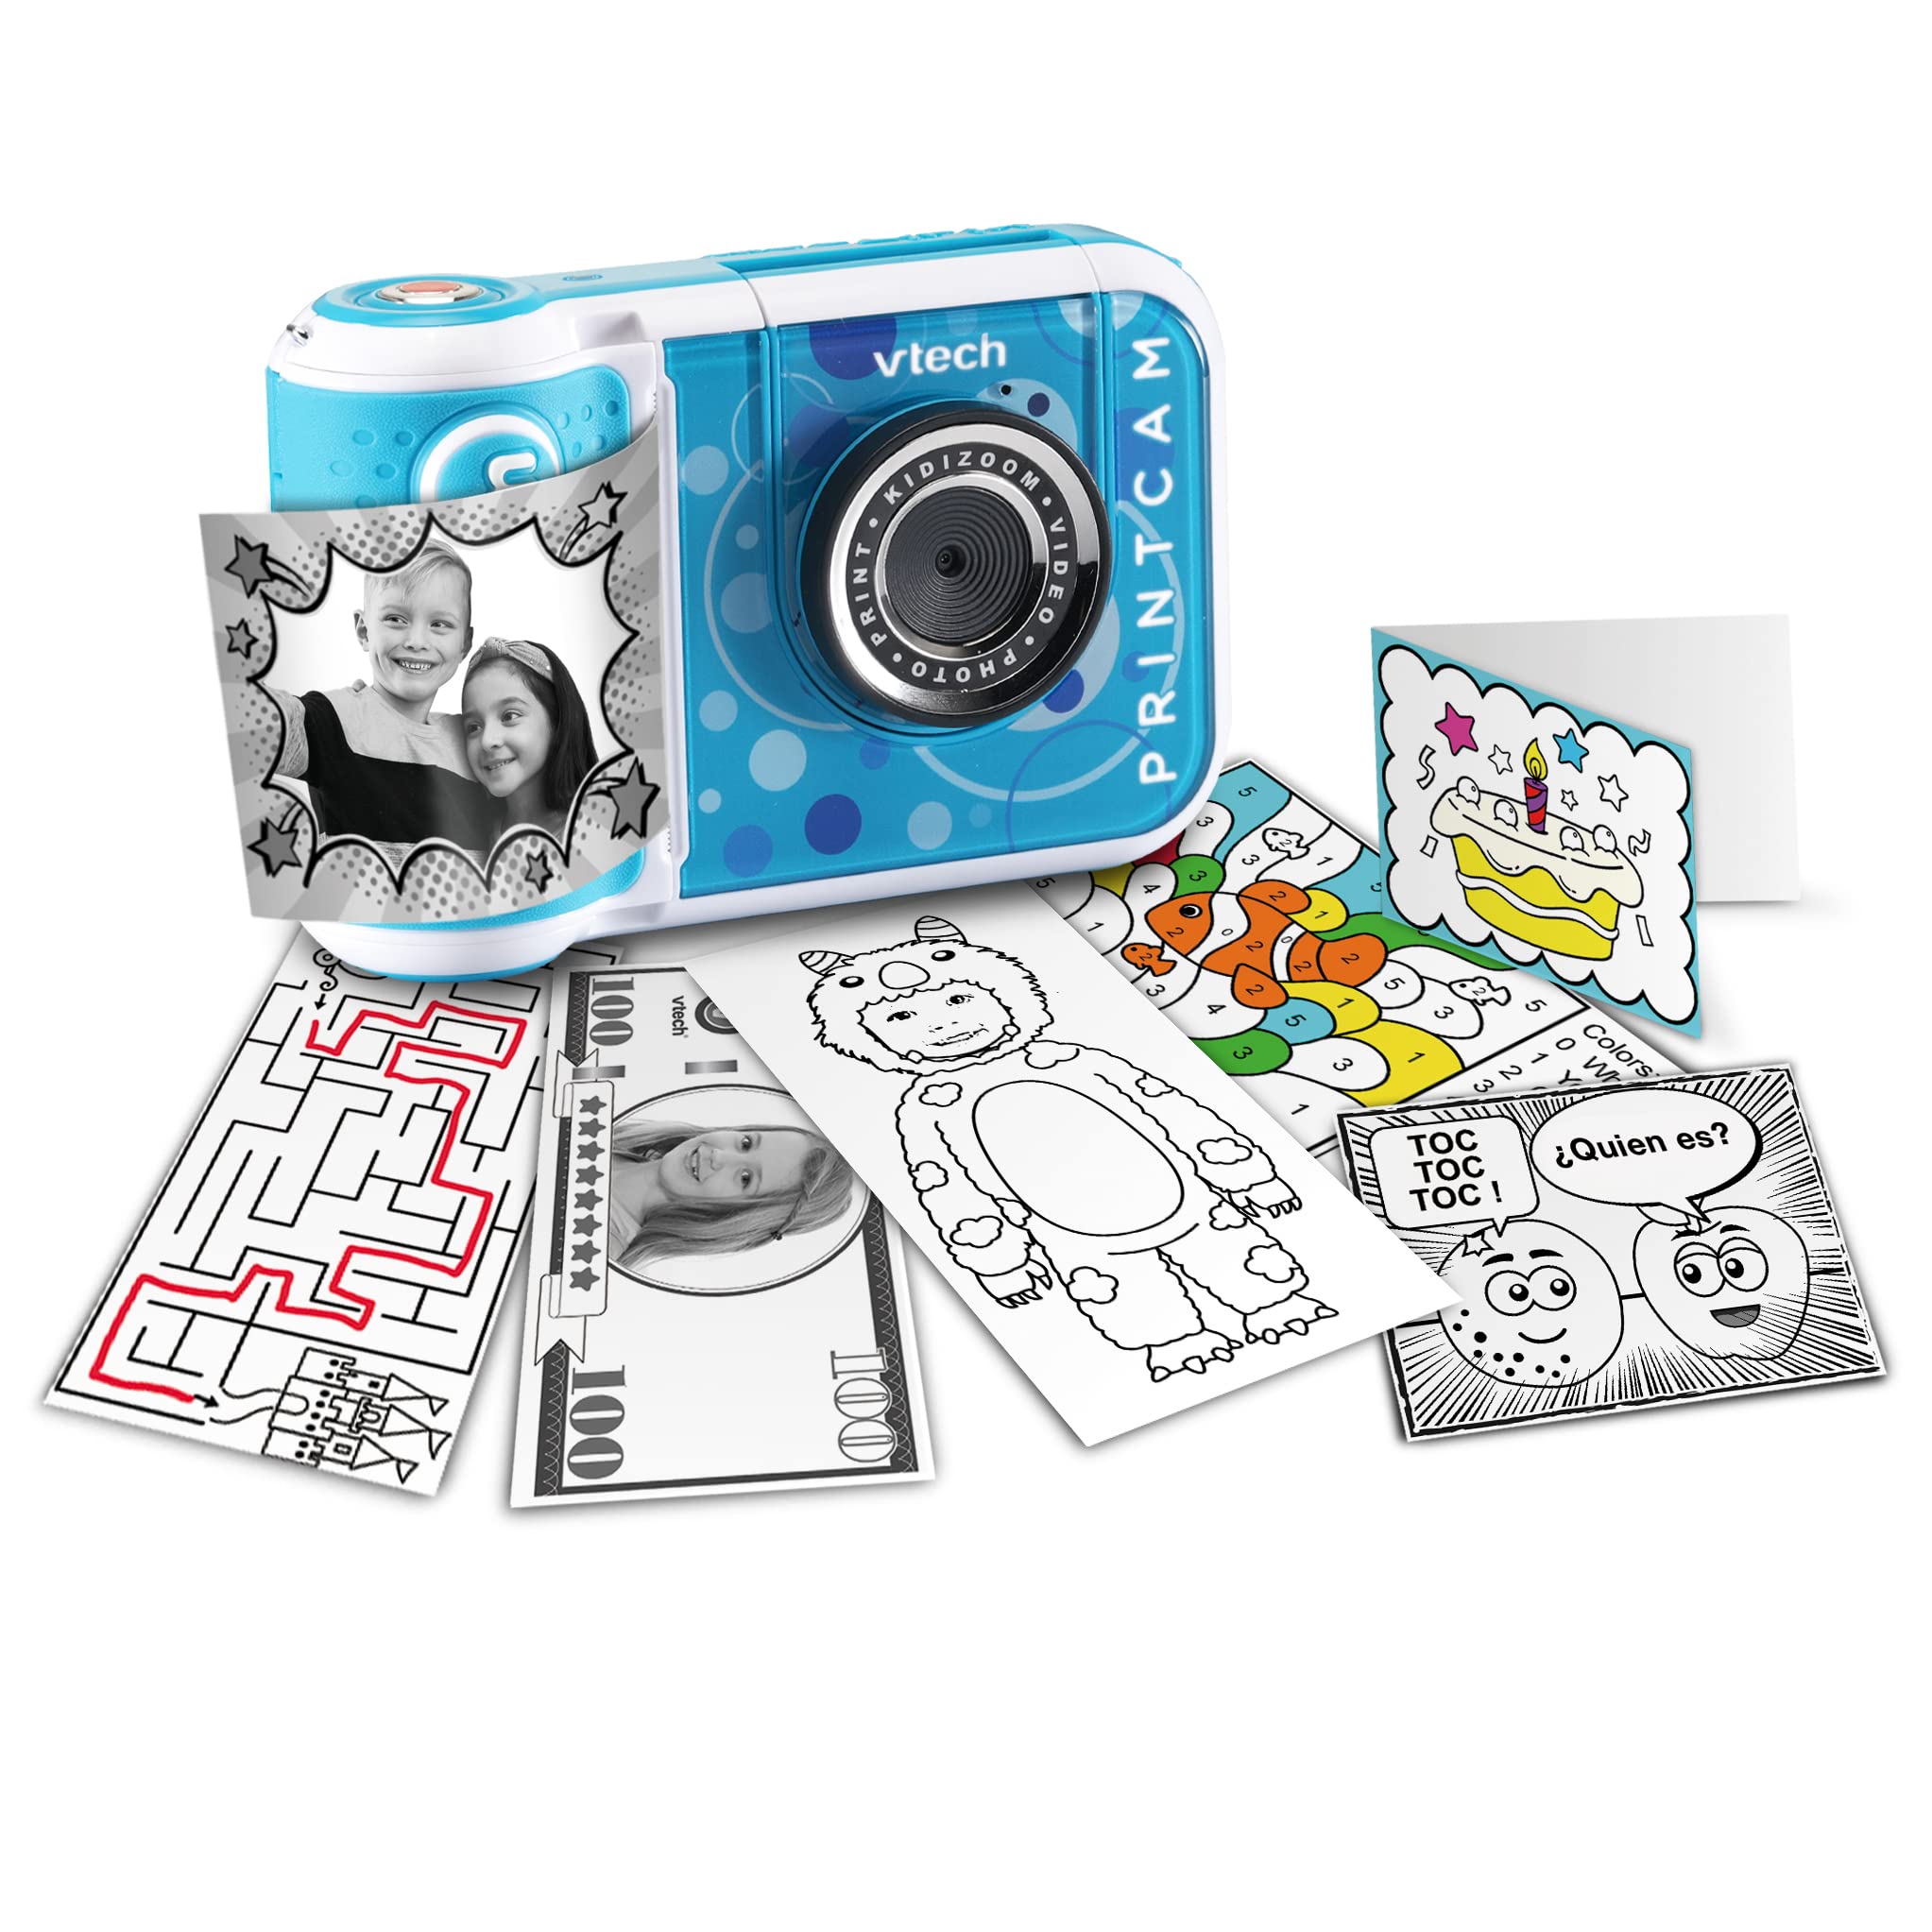 VTech Kidizoom Print CAM, Instant Photo & Video Camera for Kids 5+ Years Old, ESP Version Blue, Color (3480-549122)